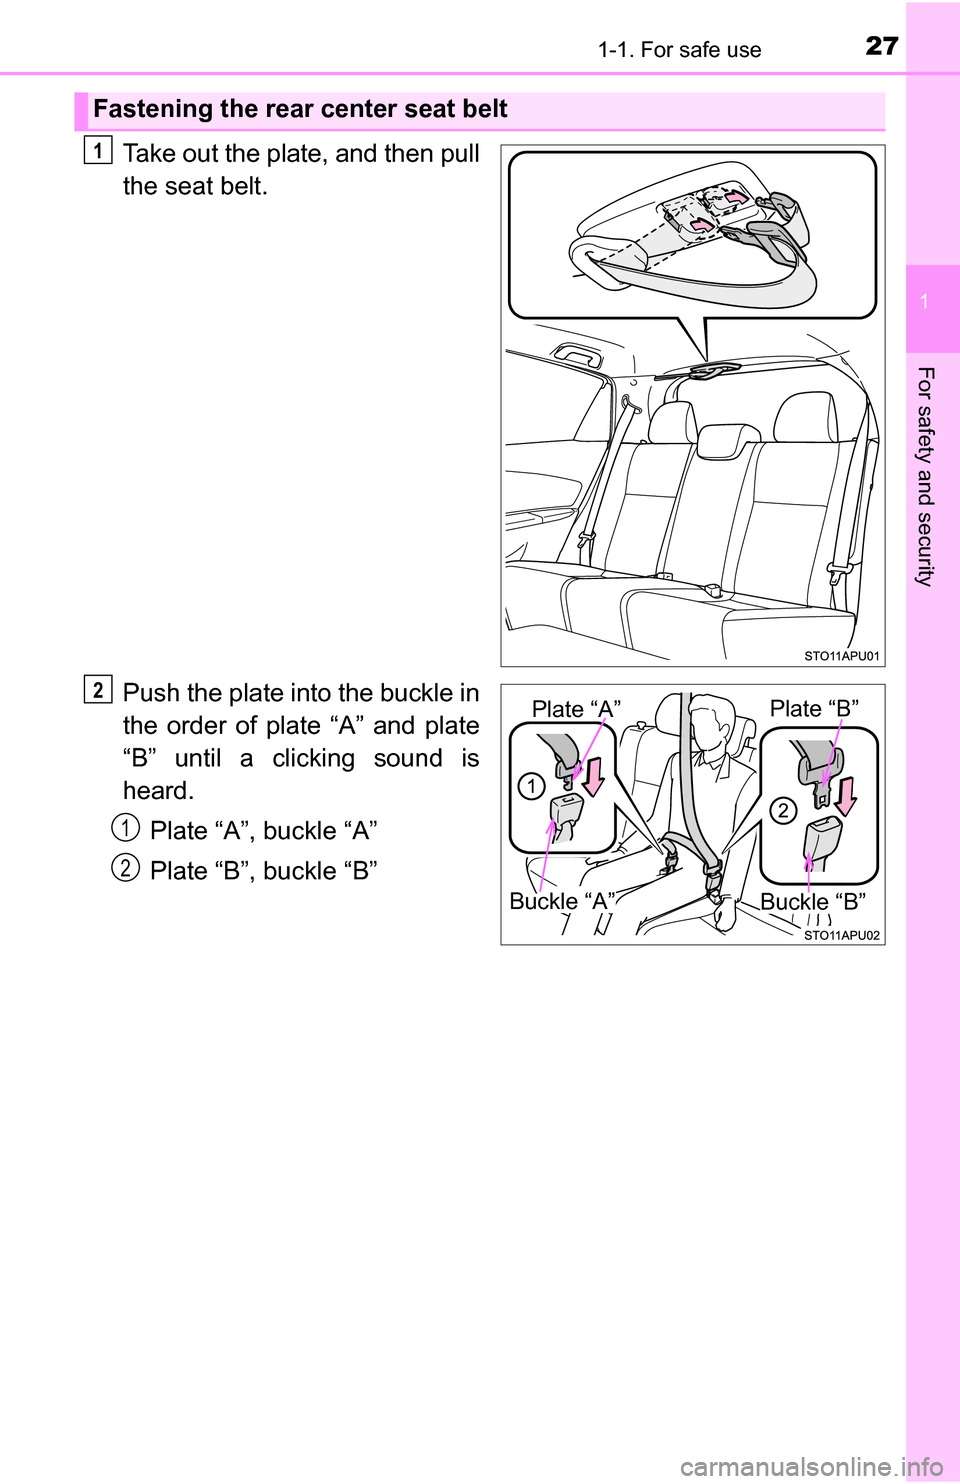 TOYOTA YARIS 2016 3.G Owners Manual 271-1. For safe use
1
For safety and security
Take out the plate, and then pull
the seat belt.
Push the plate into the buckle in
the order of plate “A” and plate
“B” until a clicking sound is
